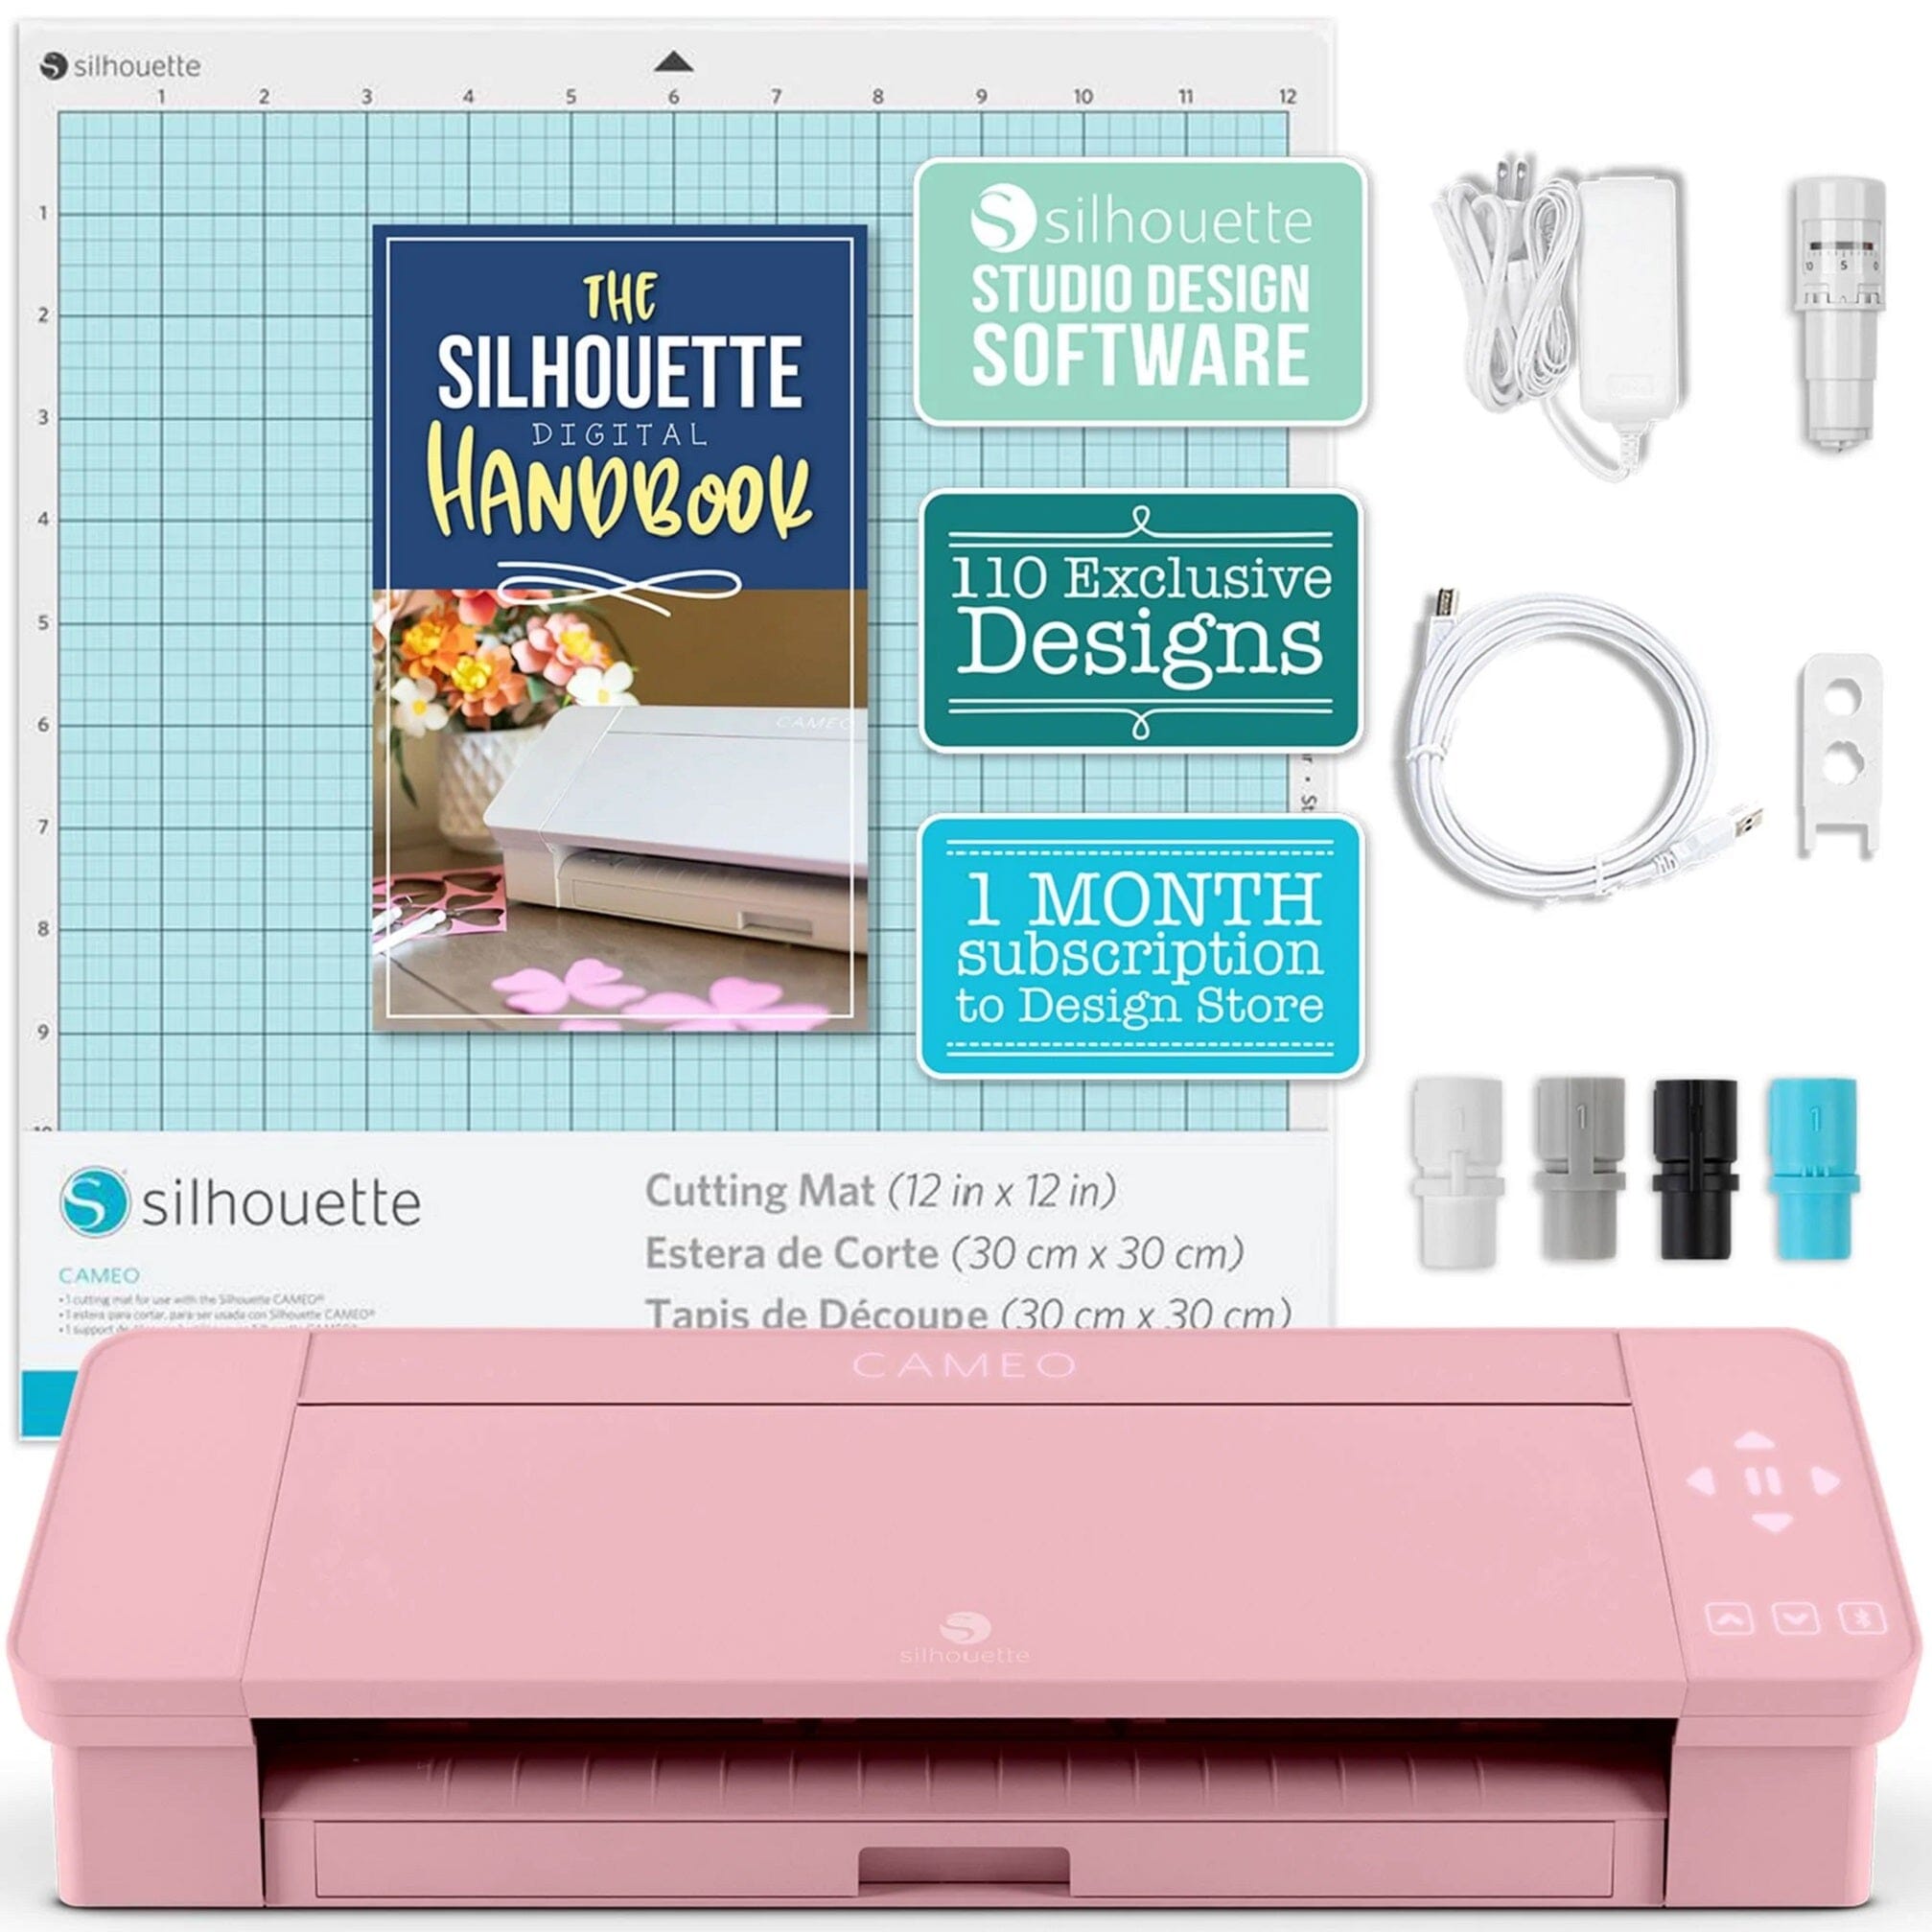 Silhouette CAMEO 4 Blade: How to Use the Ratchet Blade Instead of Autoblade  - Silhouette School